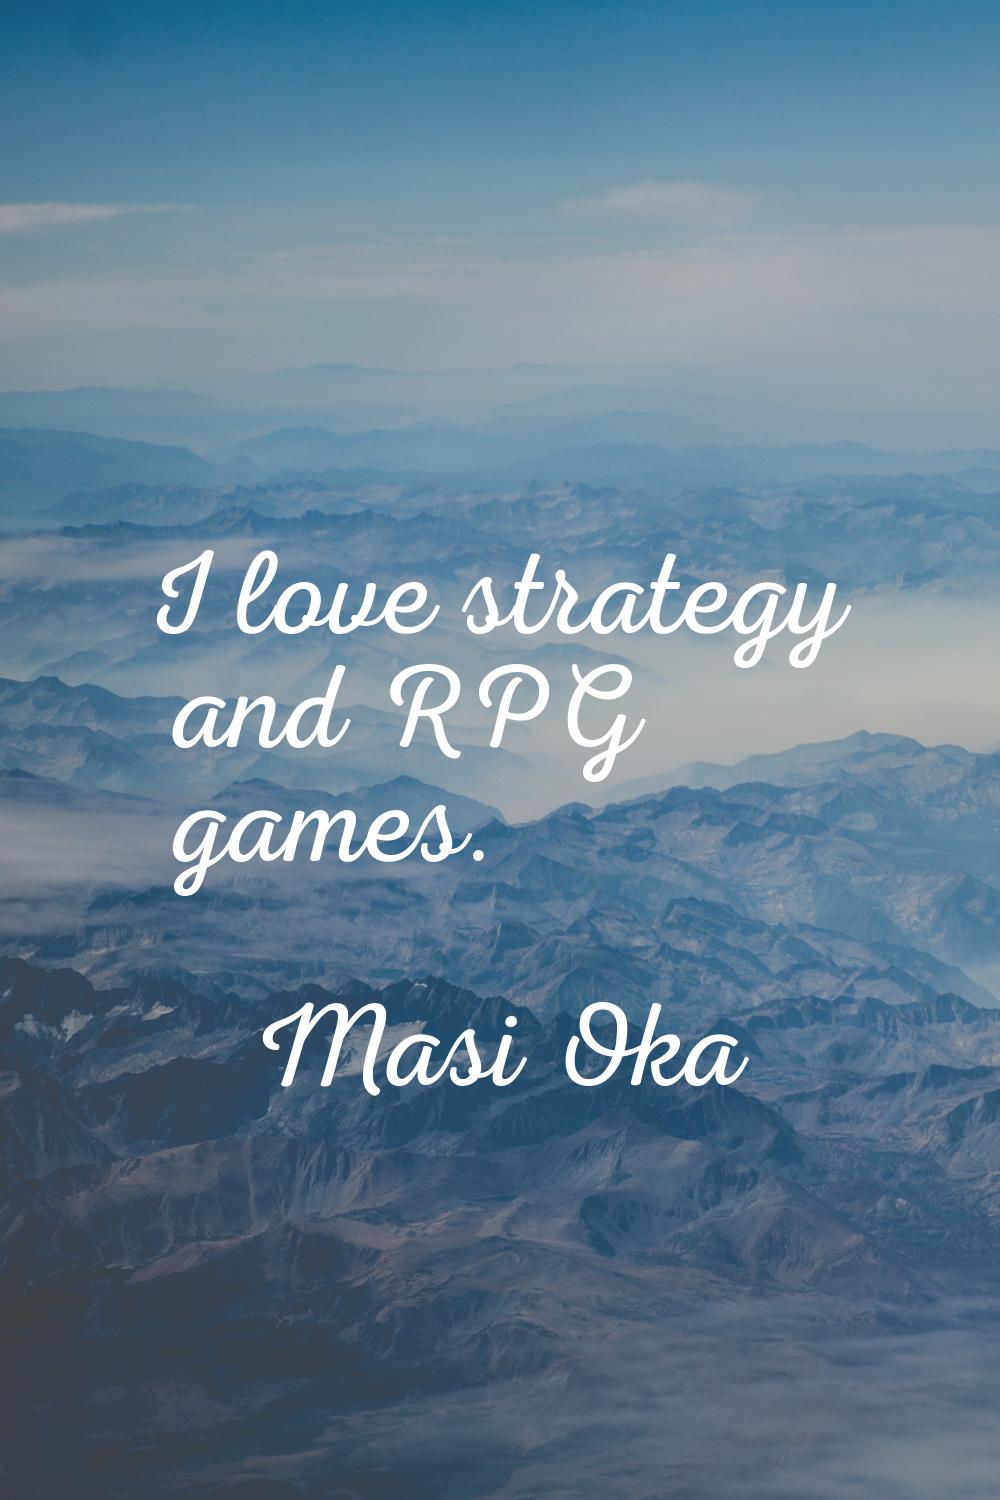 I love strategy and RPG games.